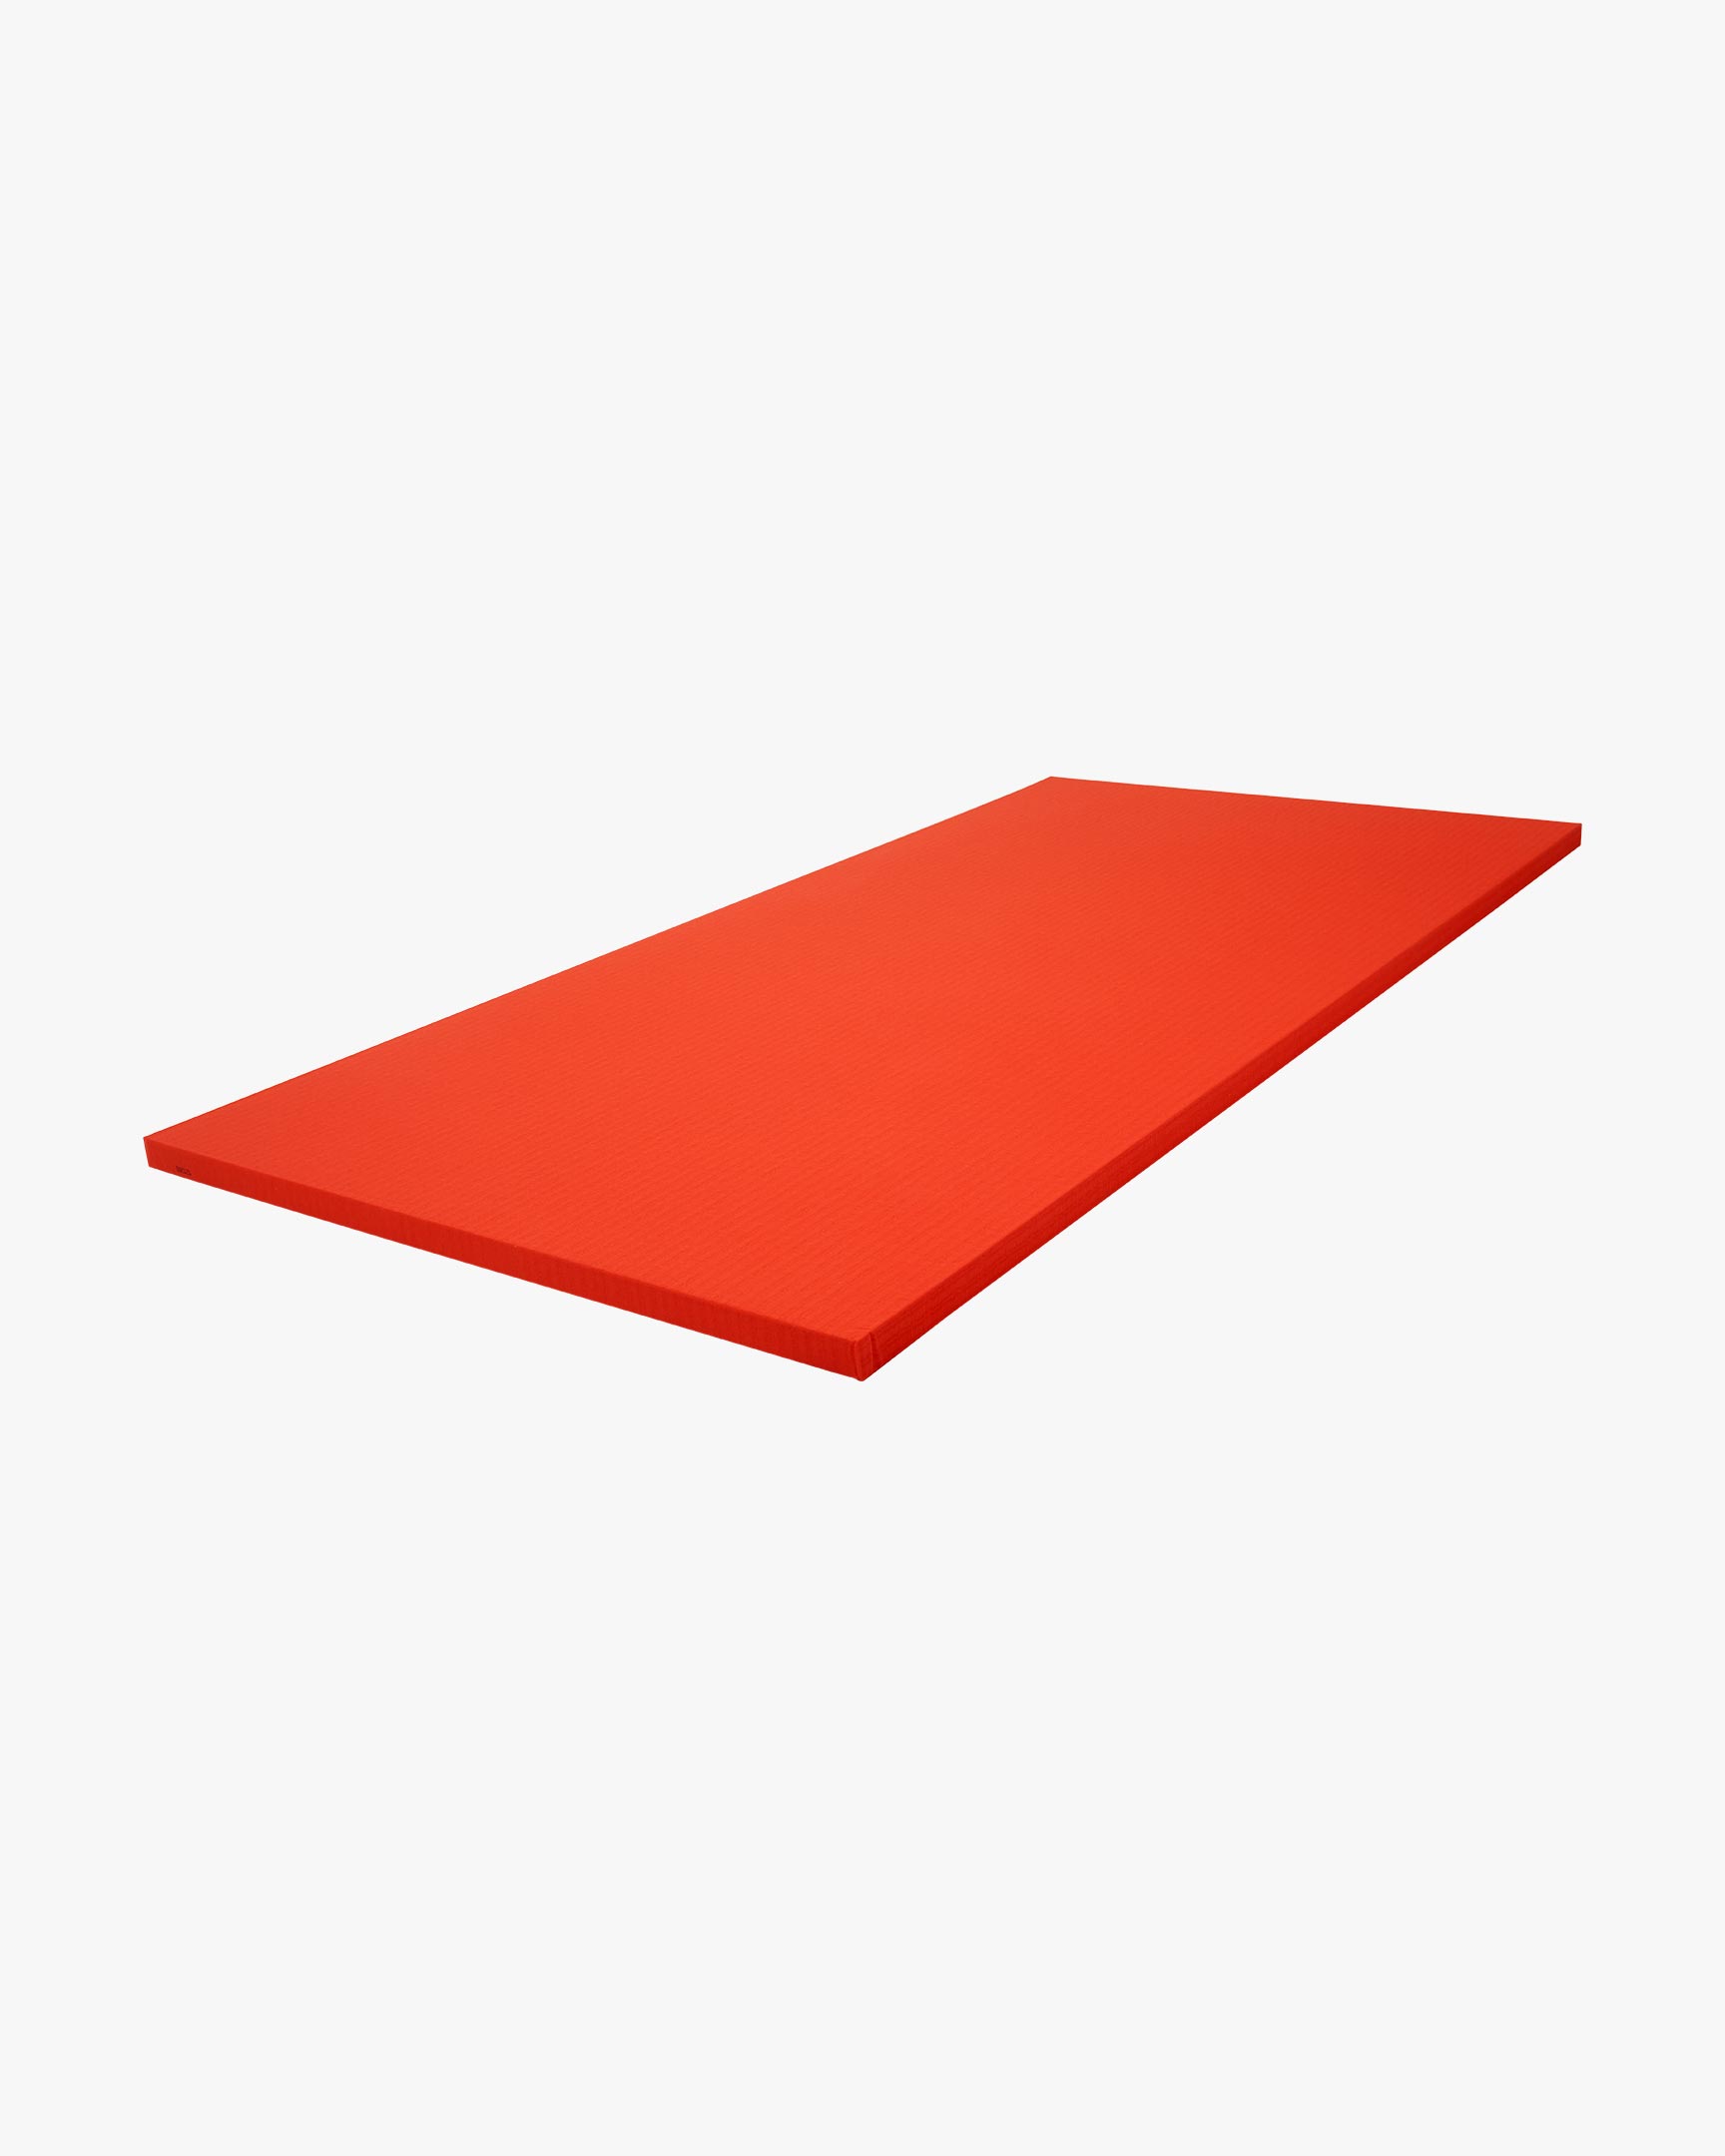 Home Tatami Rollout Mat - 5' x 10' 1.25 Thick – Century Martial Arts